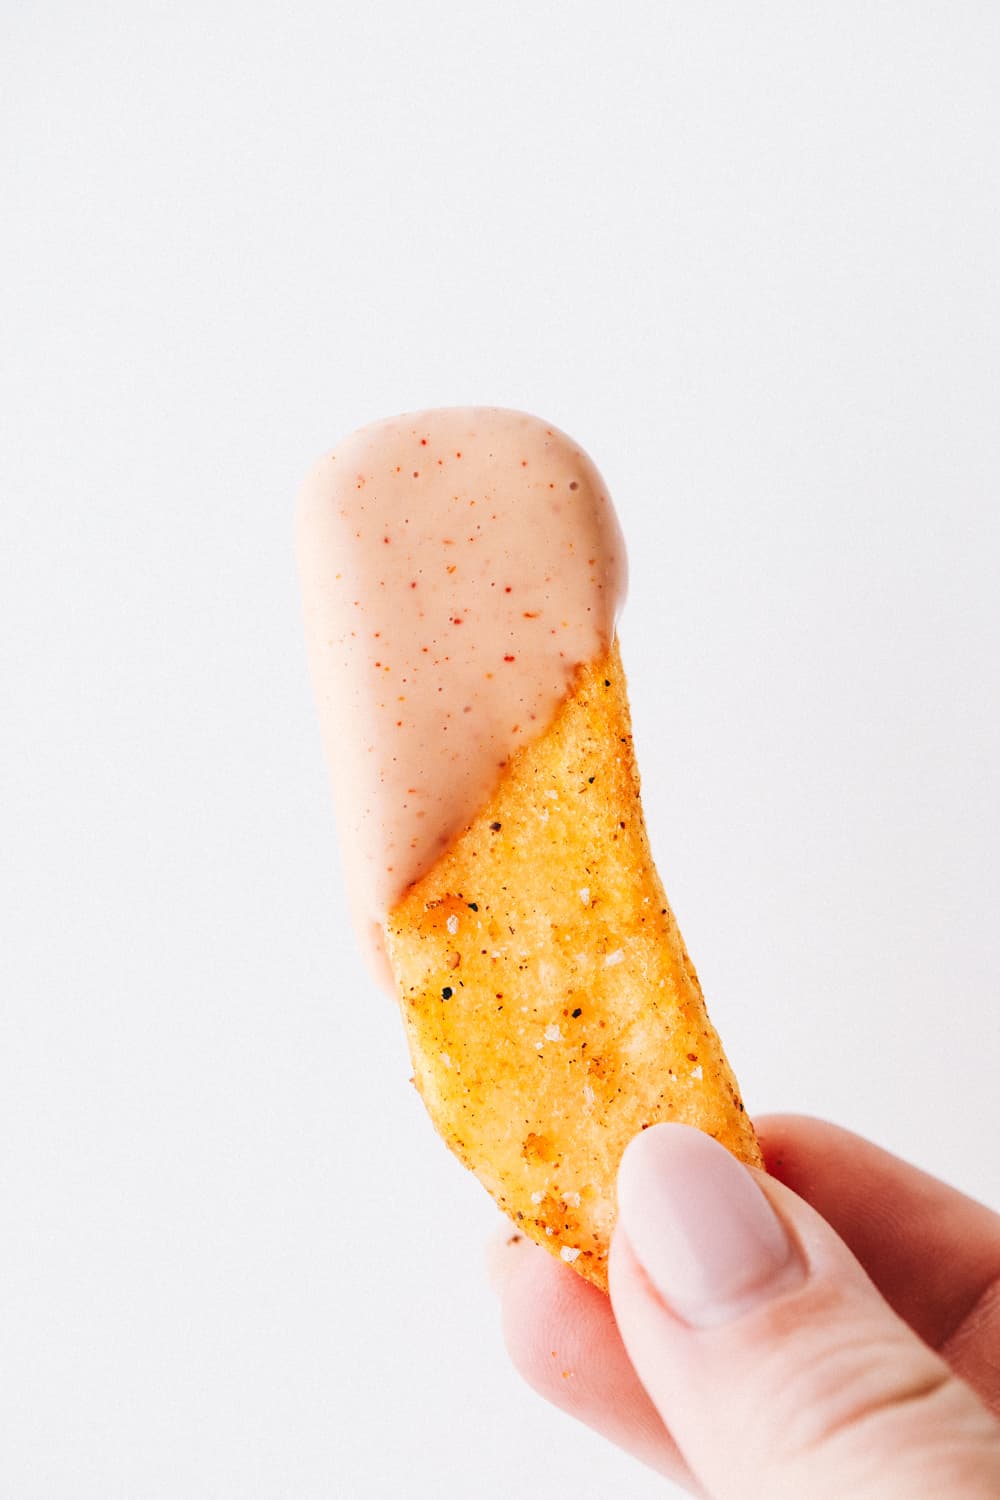 A fry dipped in Fry sauce held up. 